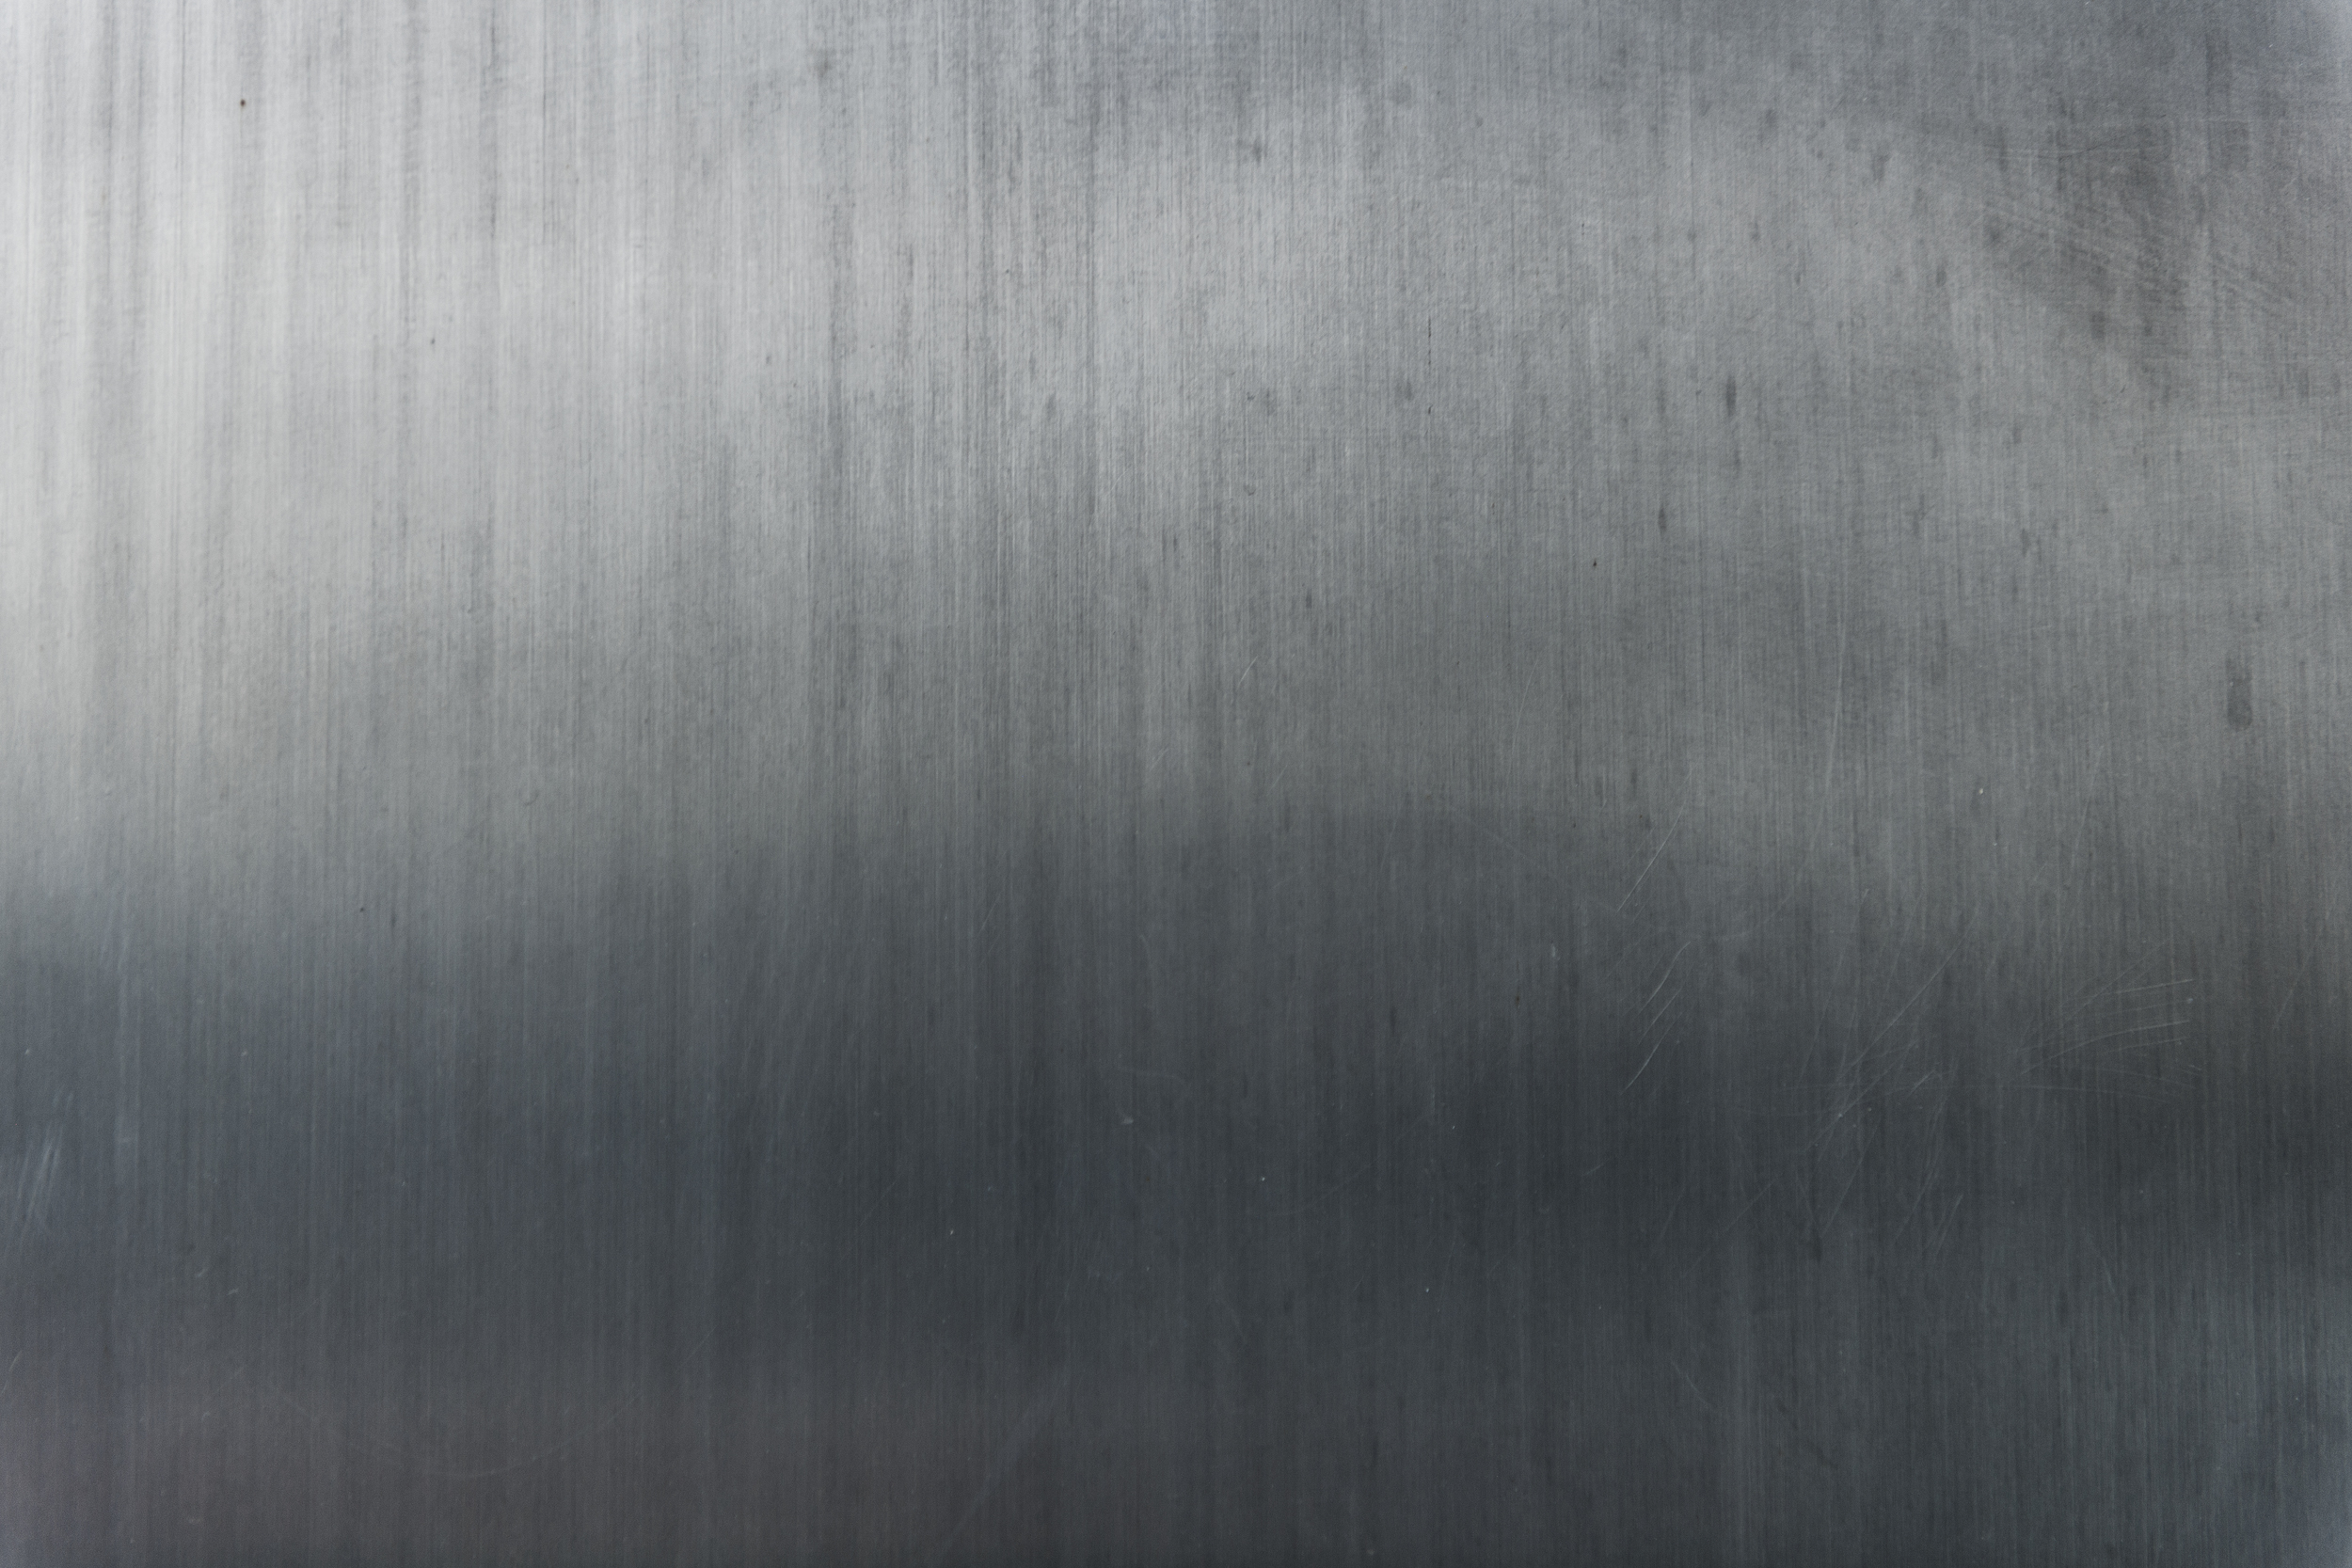 2500x1667 Free Images : background, floor, gray, metal, metallic, smooth, steel, texture, textured, wall, wallpaper, black and white, wood 1431205 Free stock photos PxHere